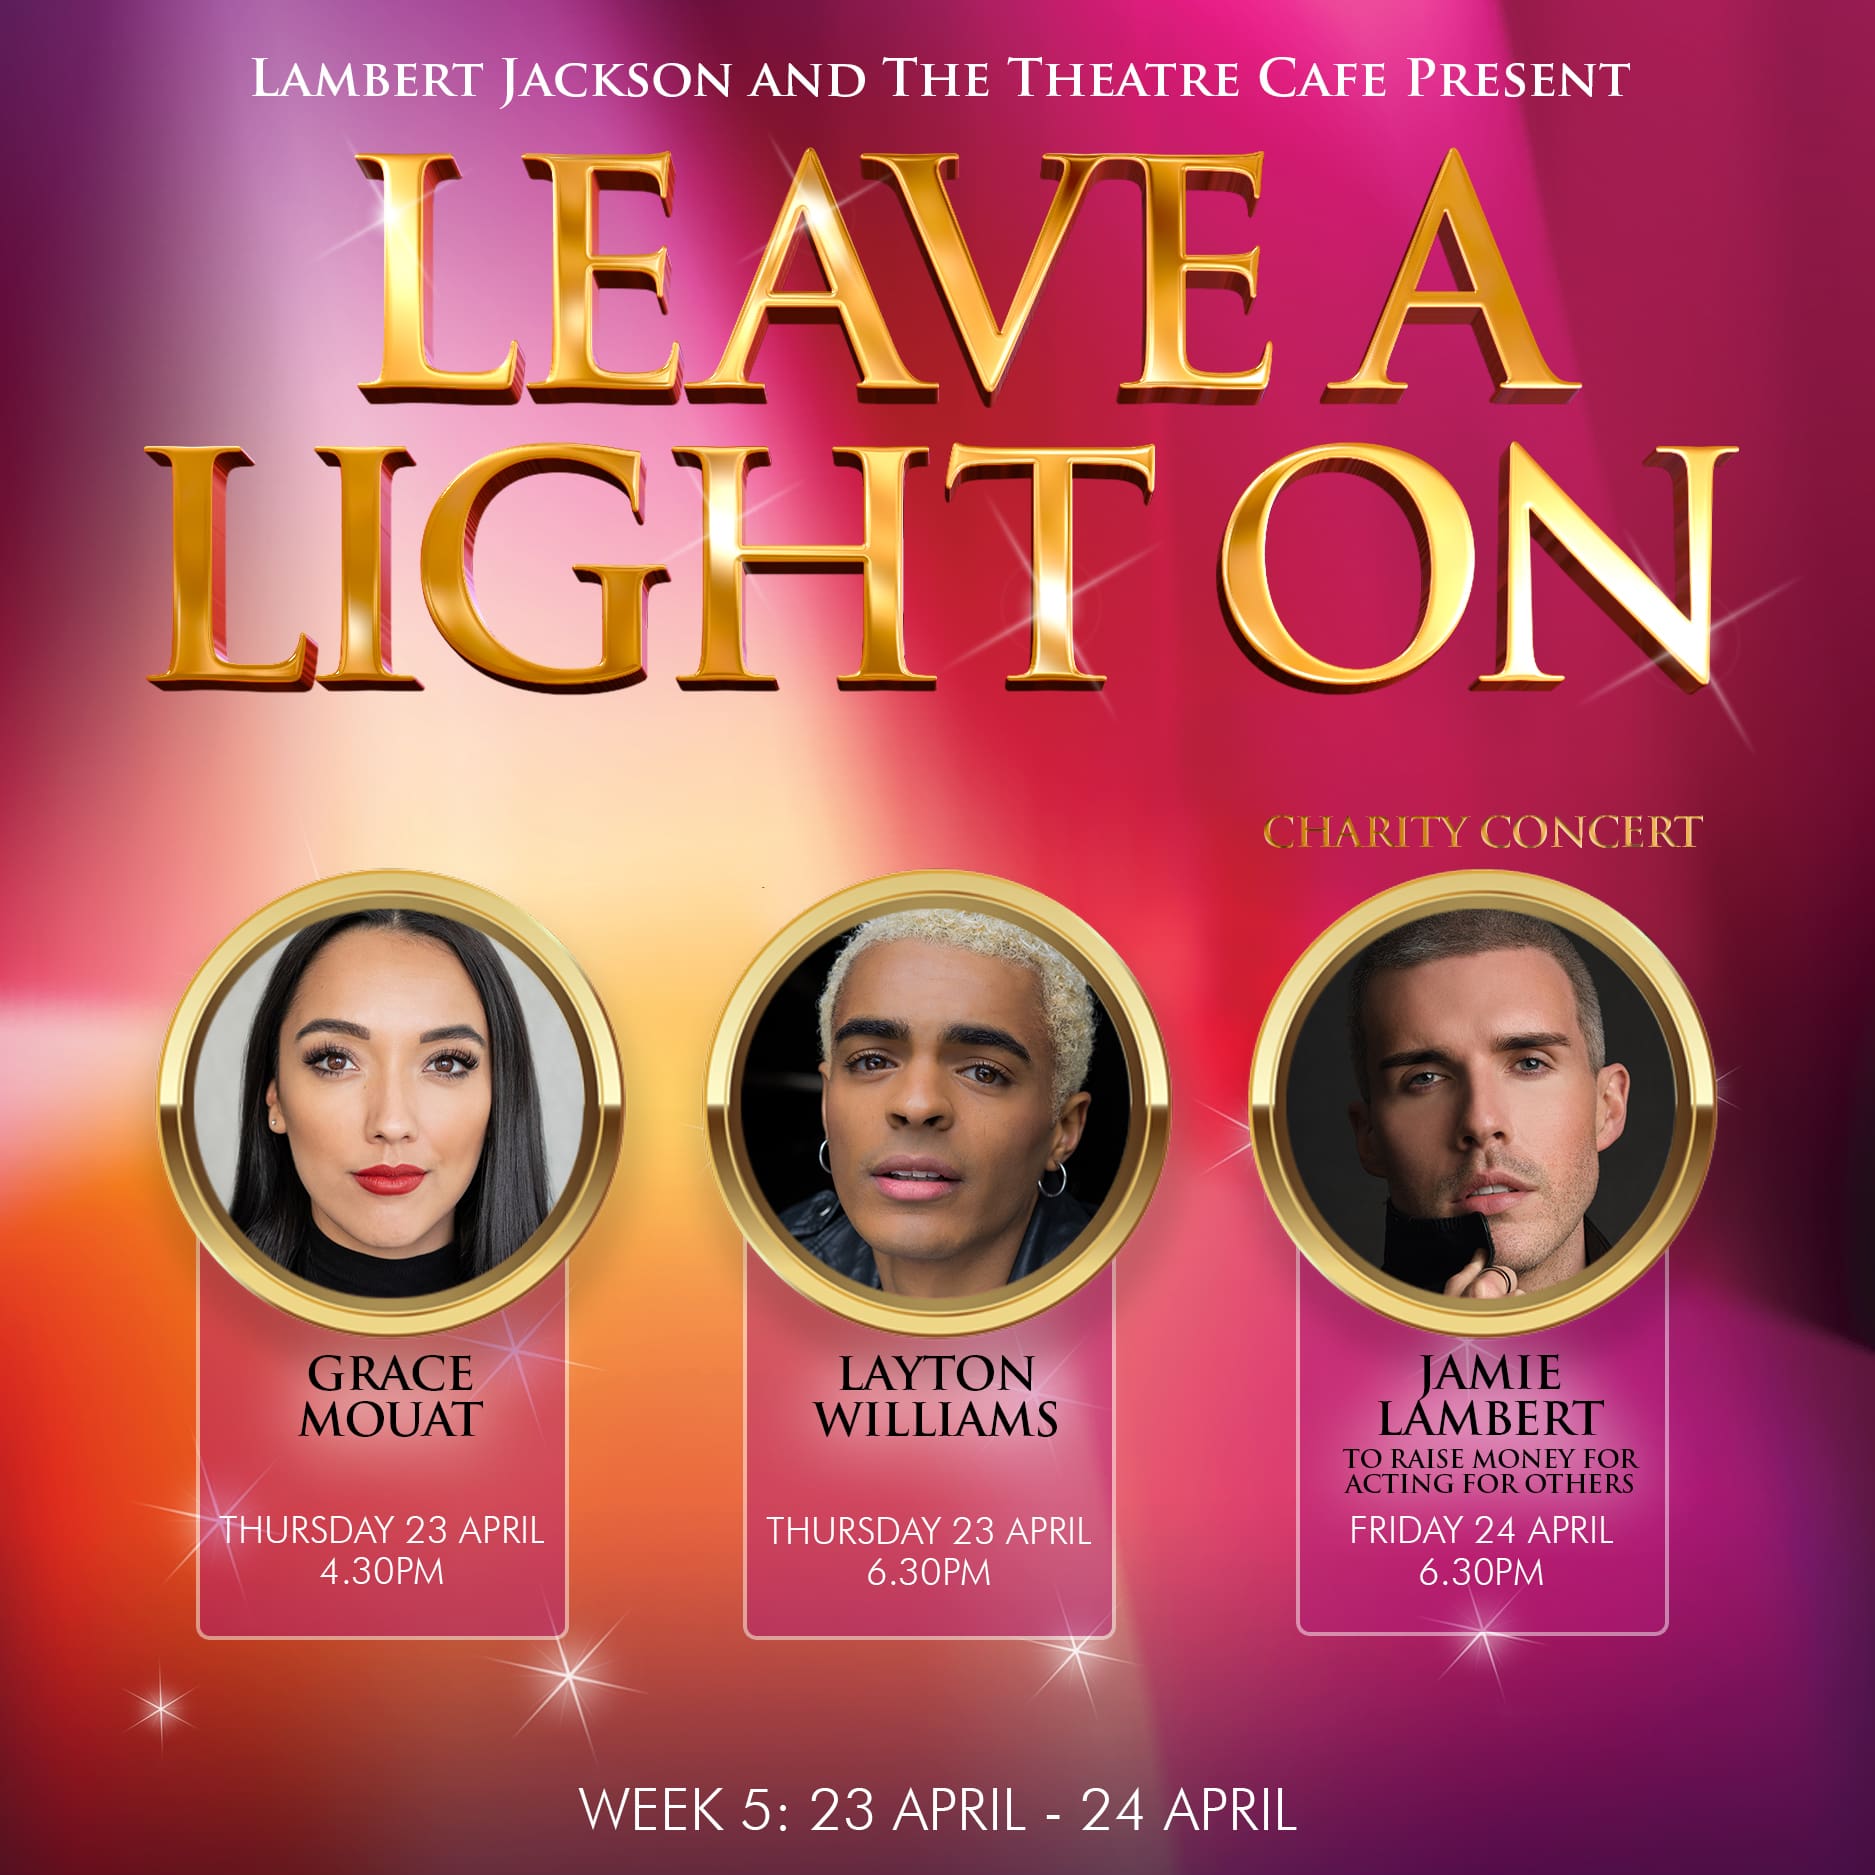 NEWS: Lineup announced for week 5 of Leave A Light On